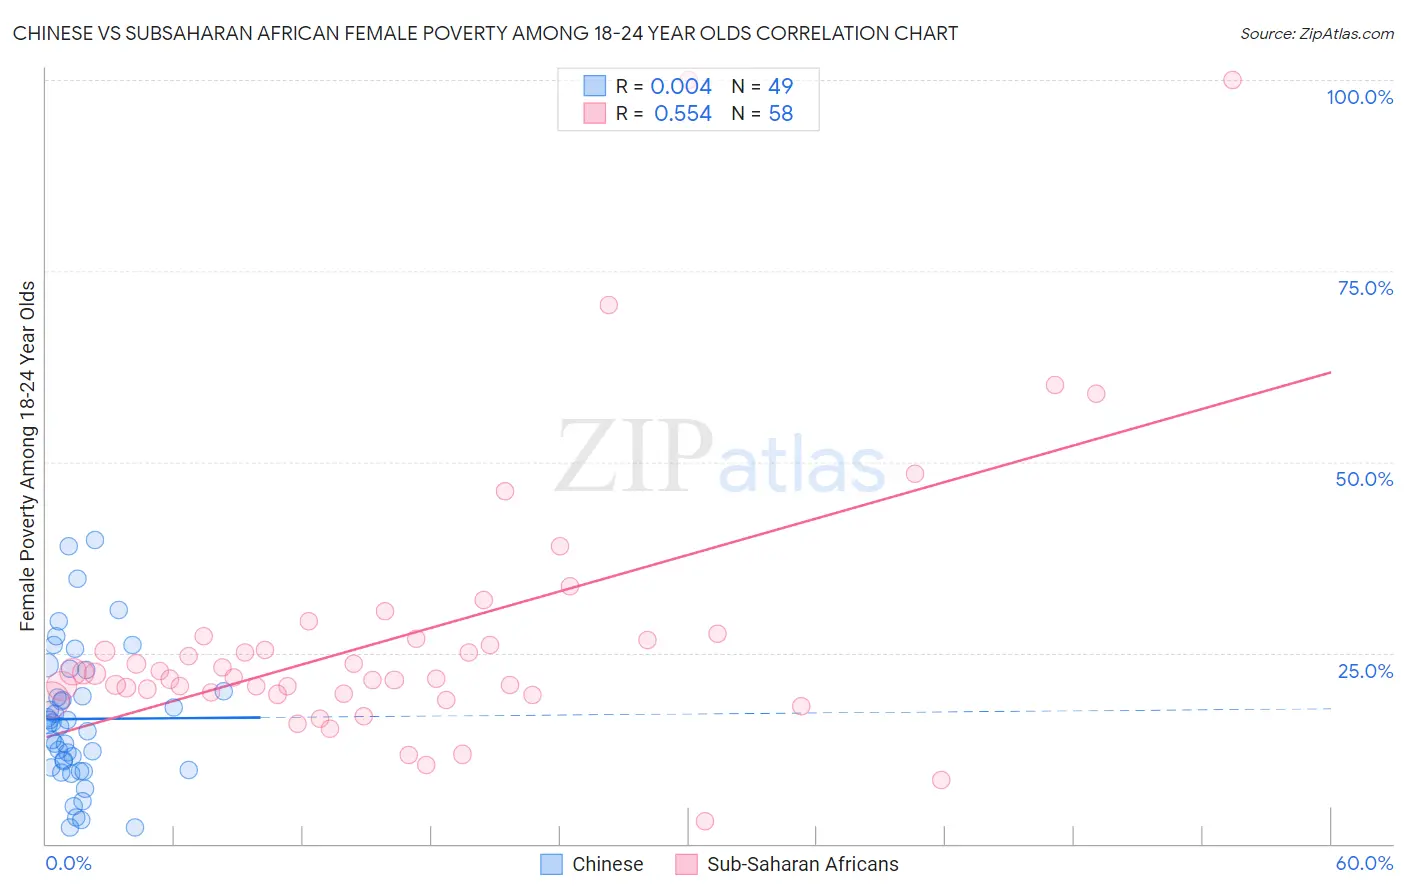 Chinese vs Subsaharan African Female Poverty Among 18-24 Year Olds